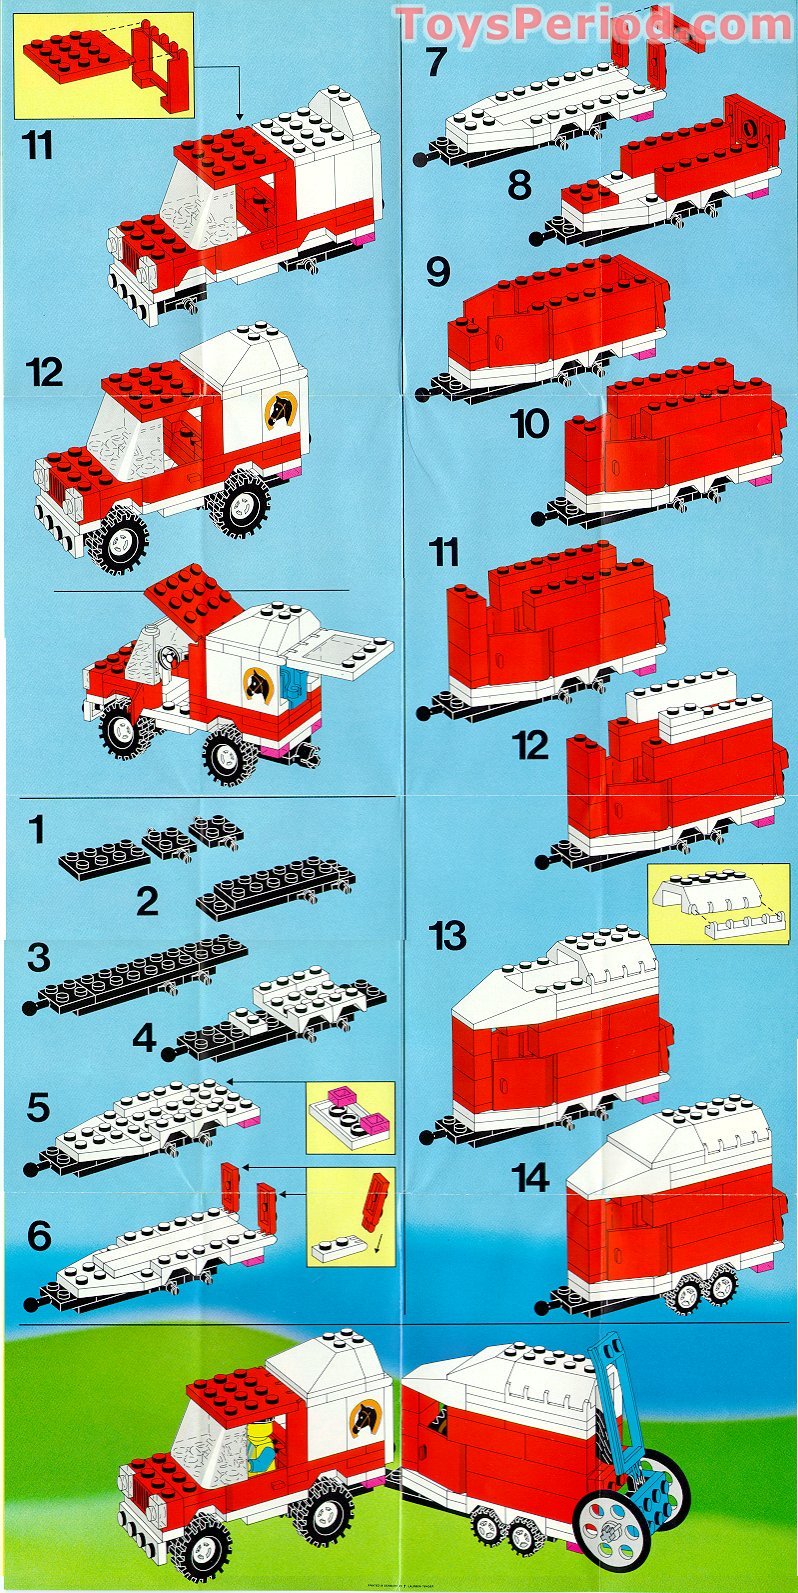 lego instructions toy period